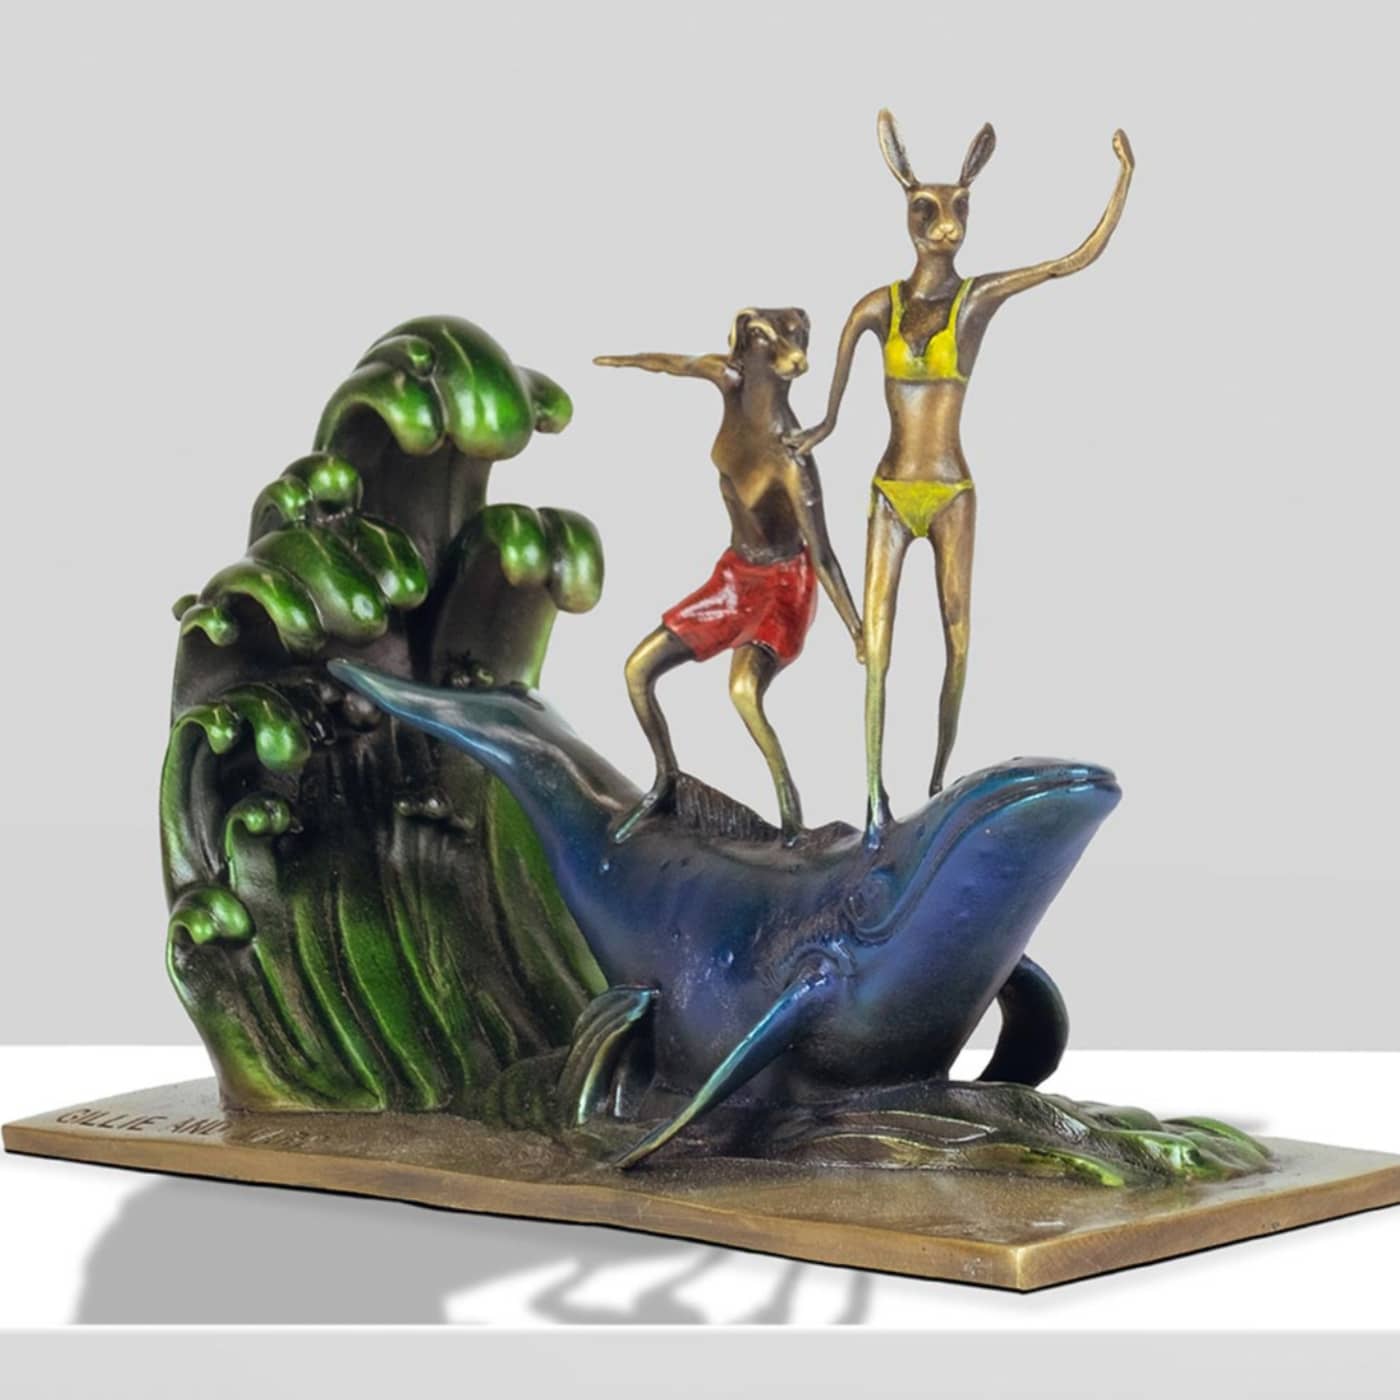 Gillie and Marc Bronze Sculpture ~ 'They Had a Whale of a Adventure on a Grand Scale' - Curate Art & Design Gallery Sorrento Mornington Peninsula Melbourne